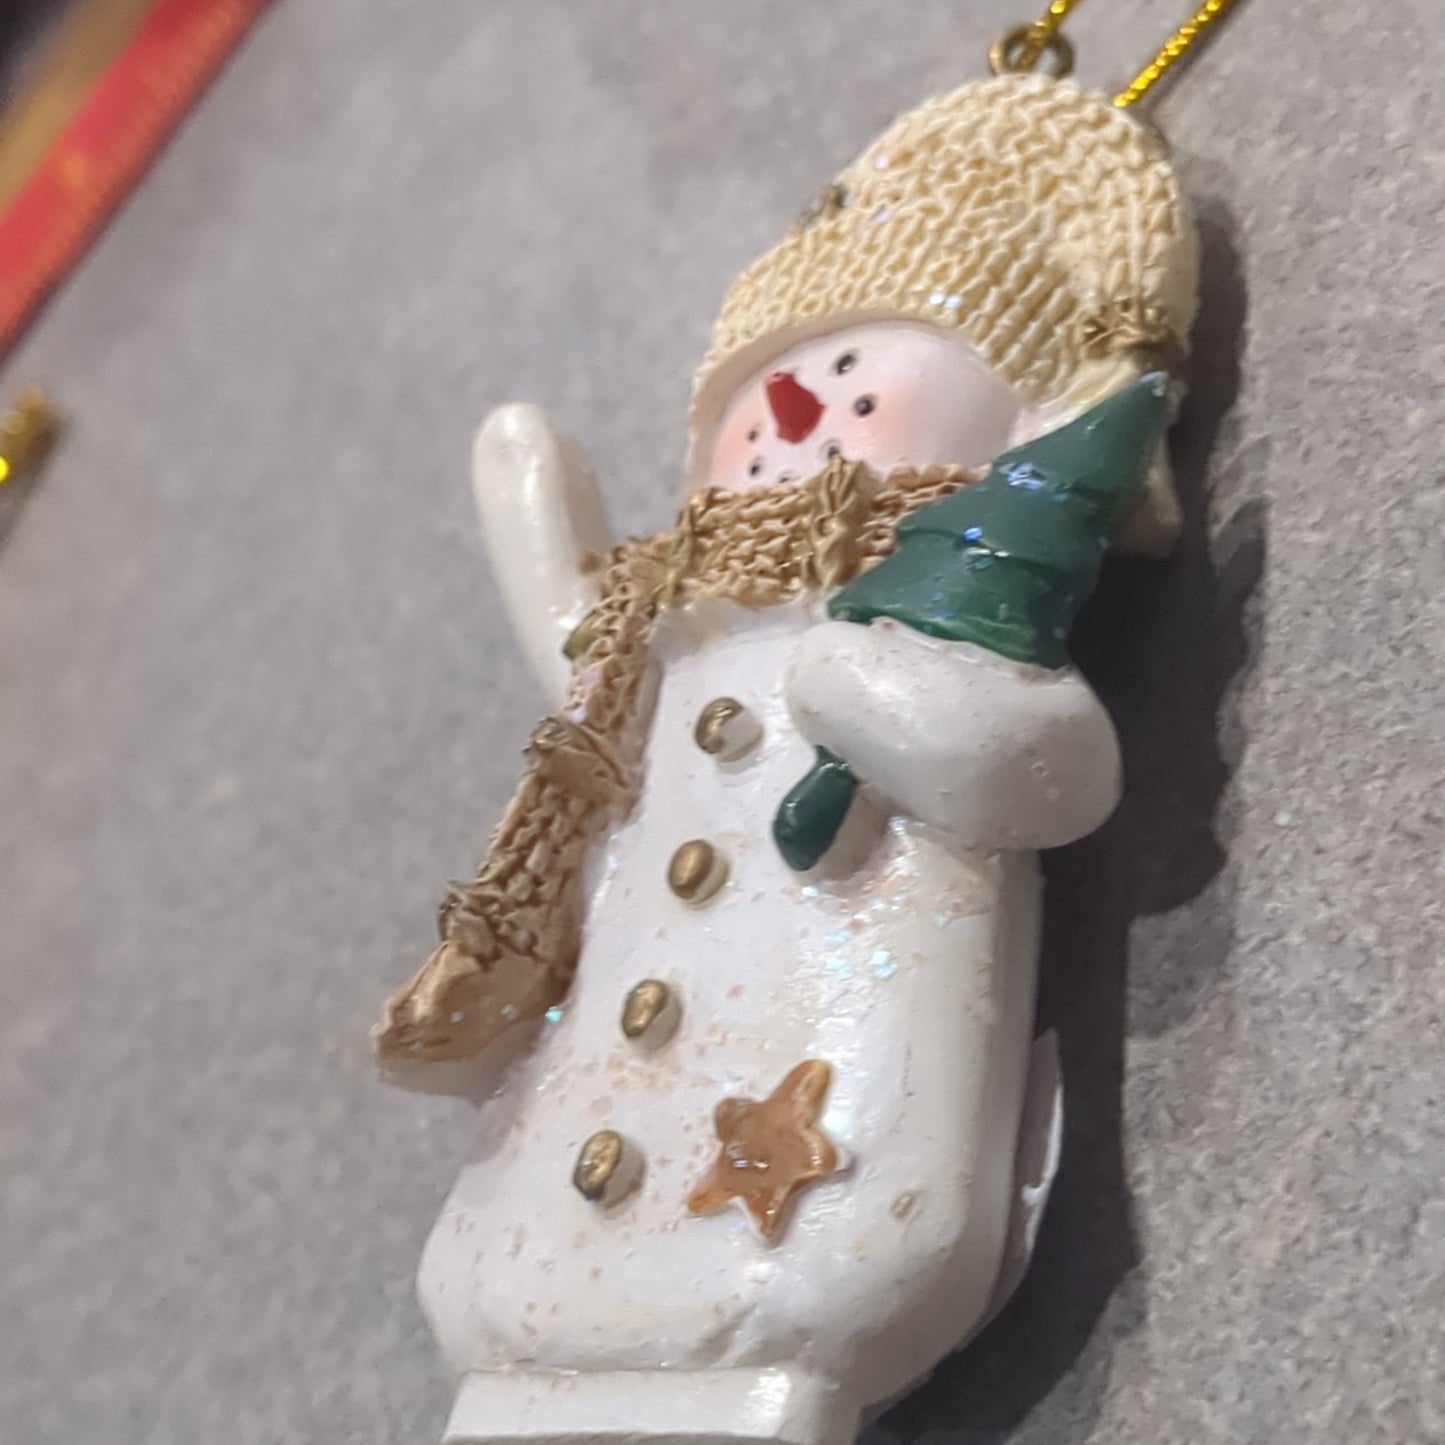 Polycrylic snowman ornament with tree yellow